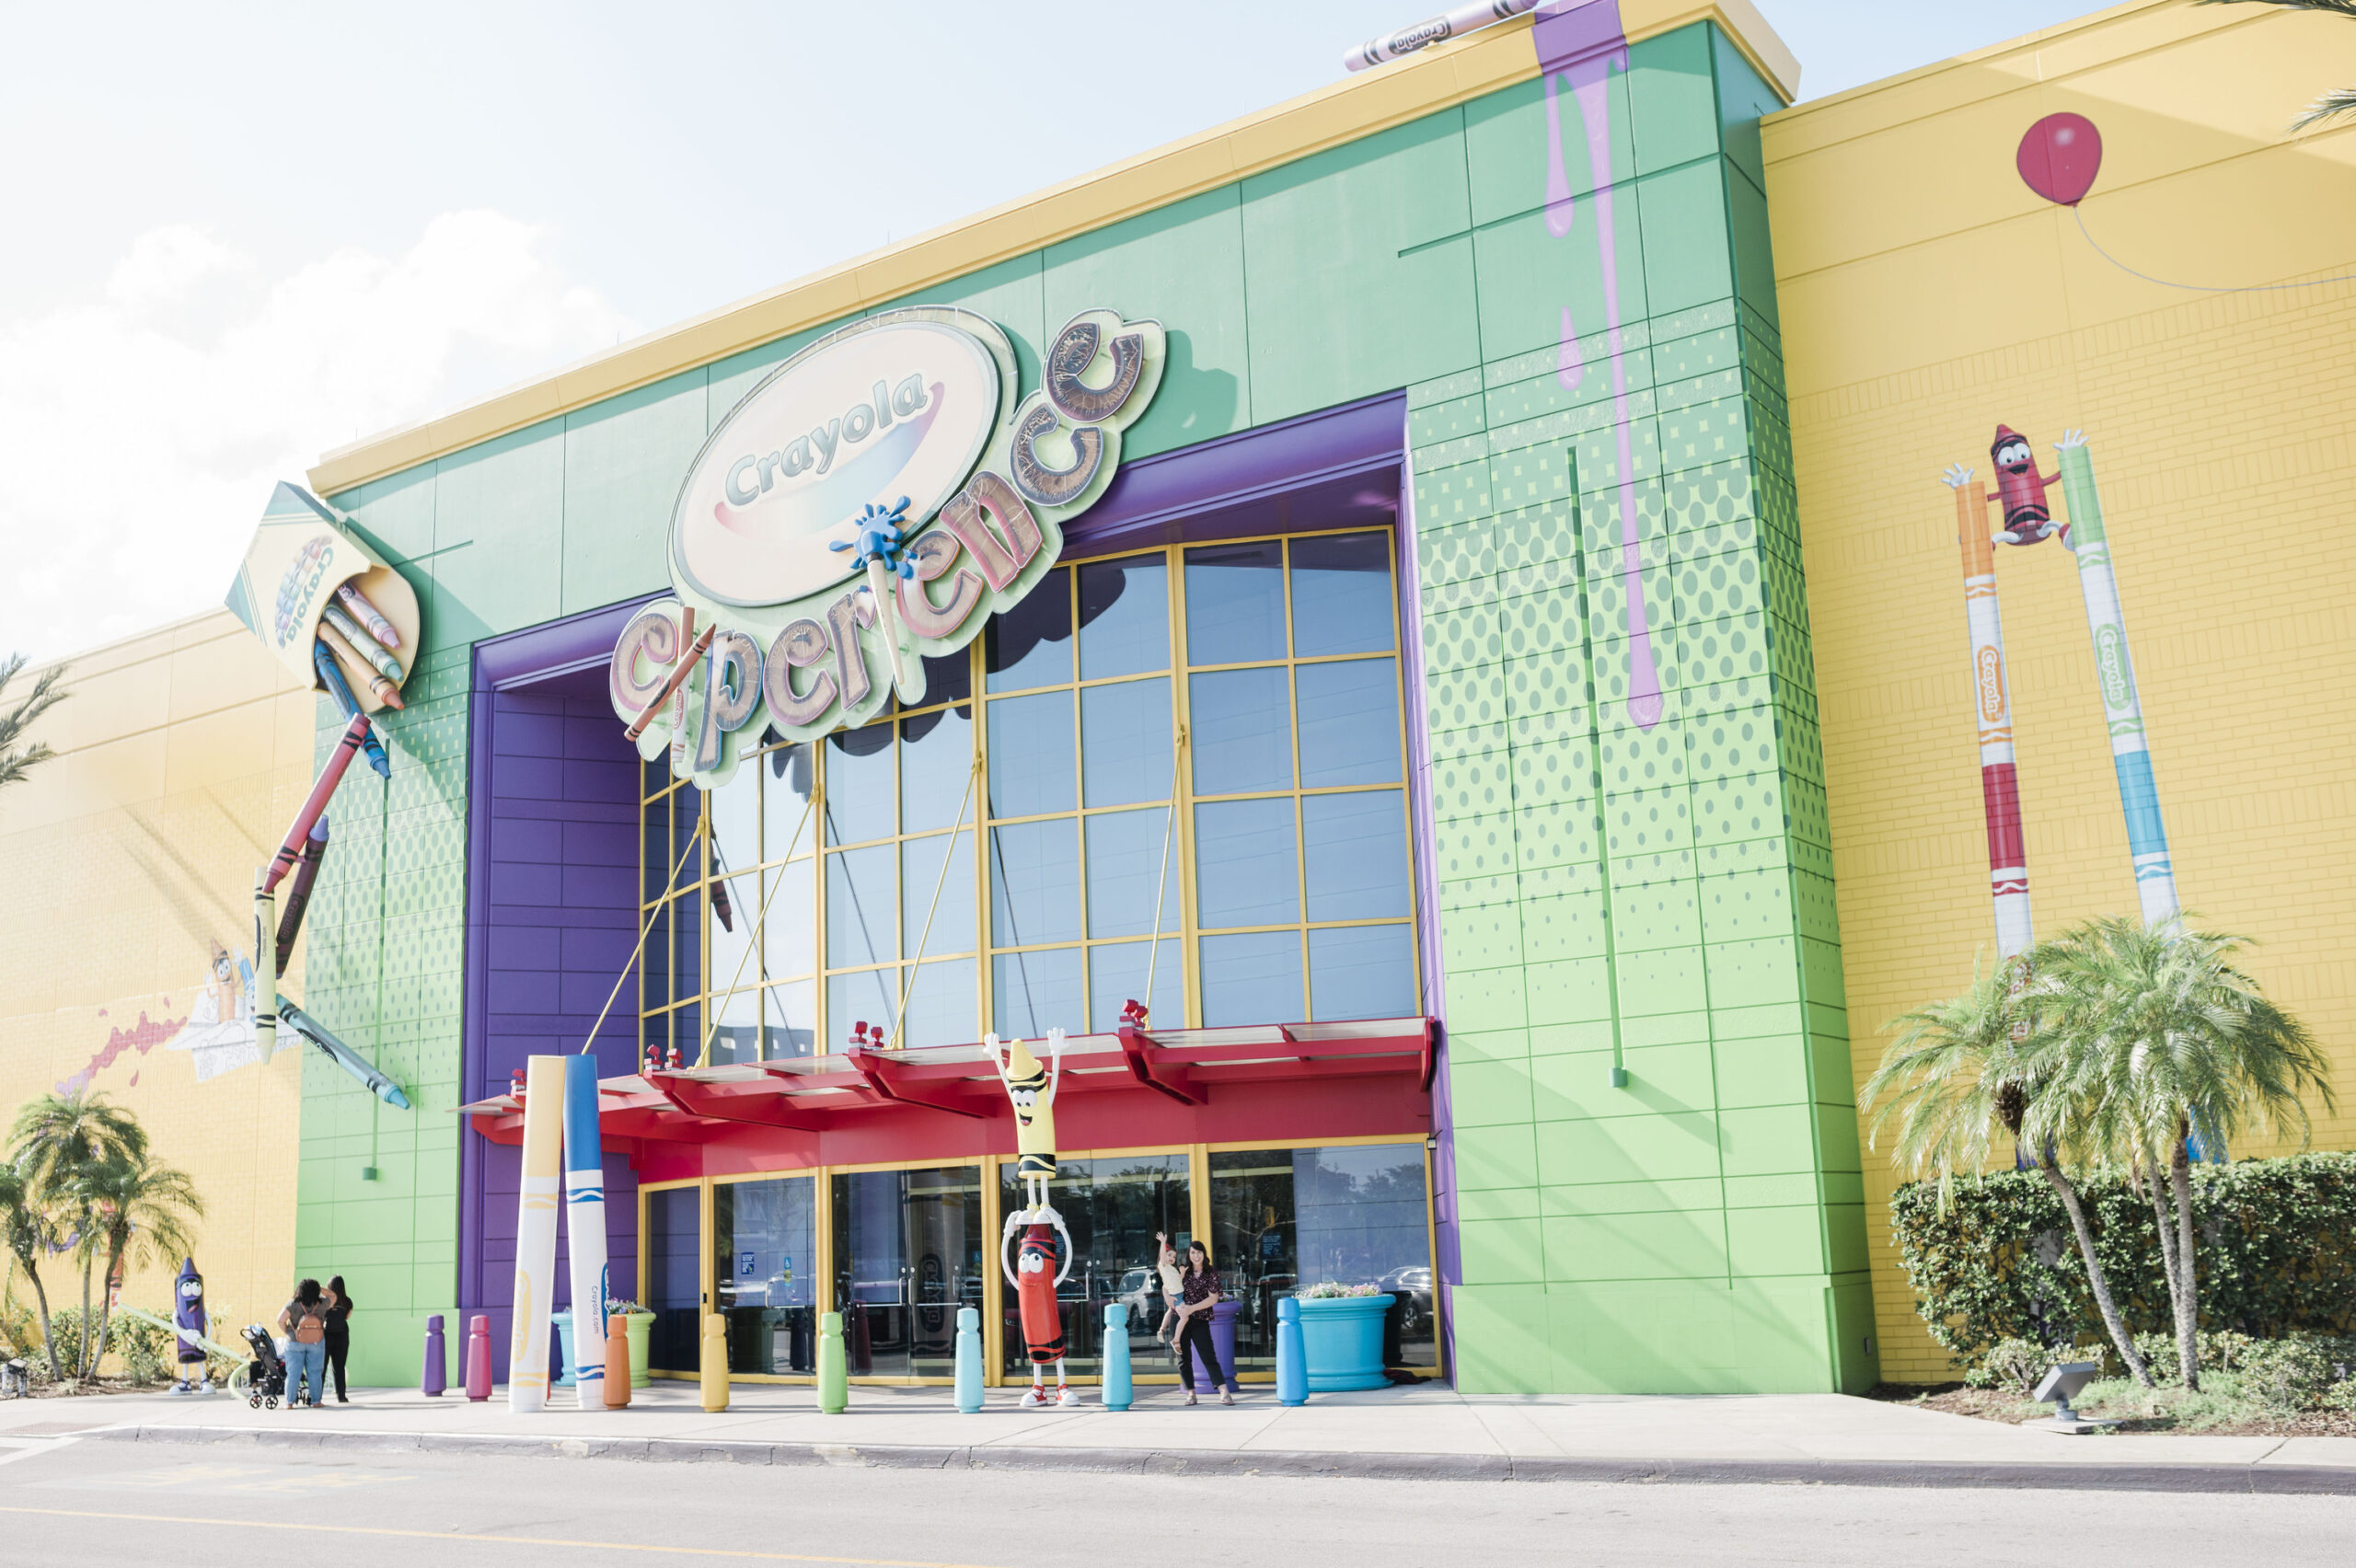 crayola experience orlando, family standing outside large colorful building with lifesize crayons